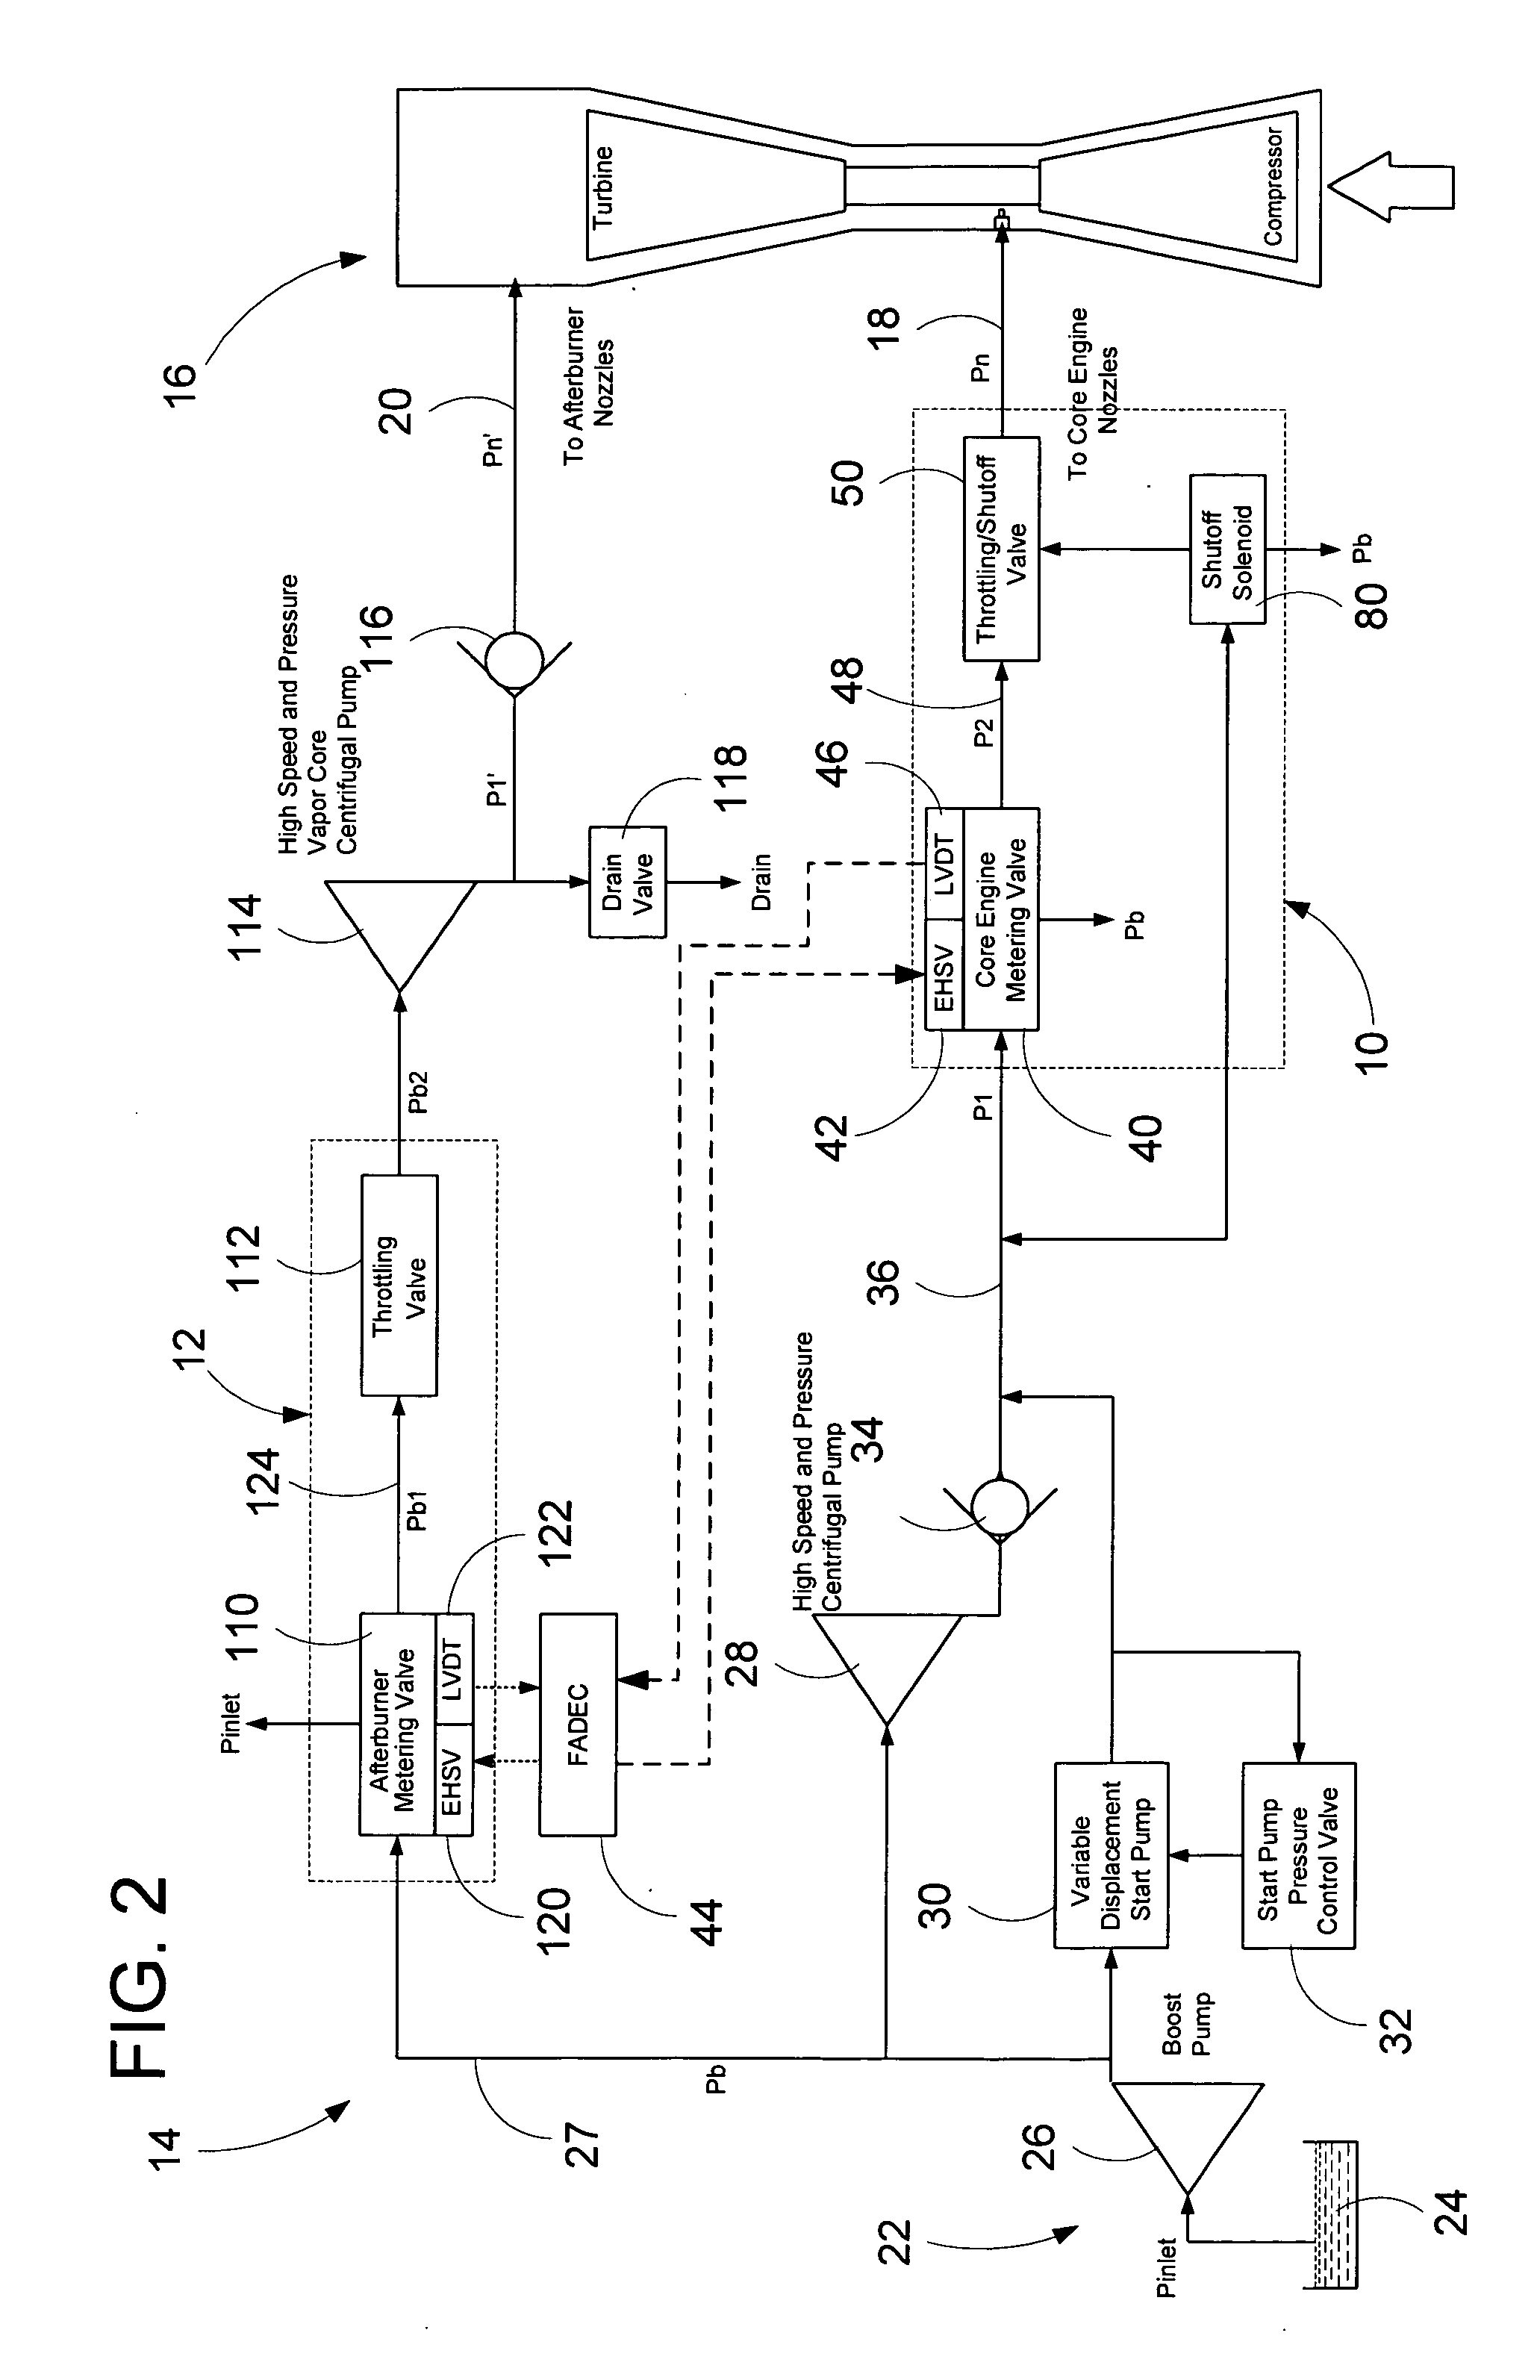 Centrifugal pump fuel system and method for gas turbine engine